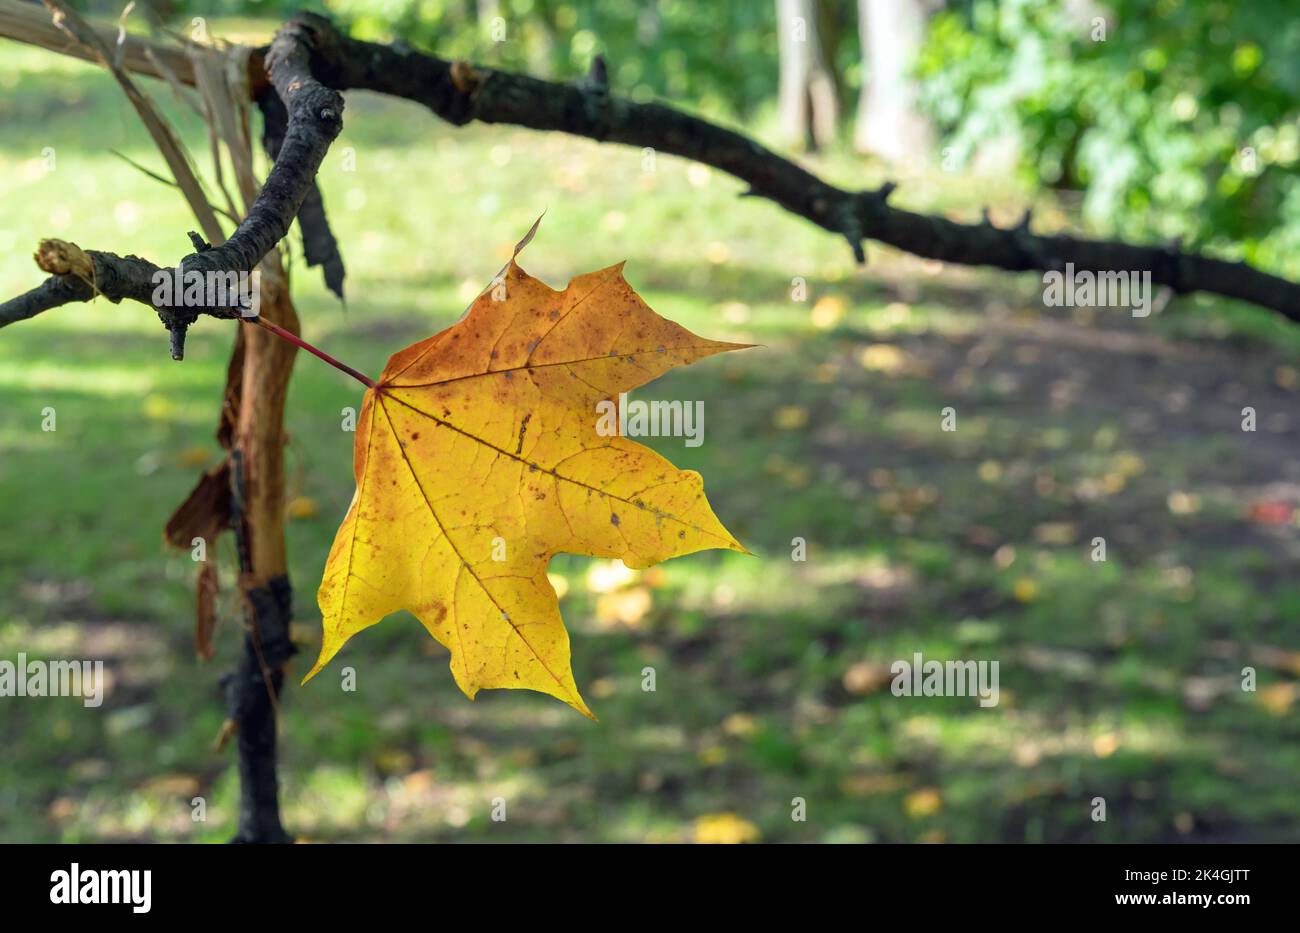 A lone maple leaf on a tree branch in an autumn park. Stock Photo